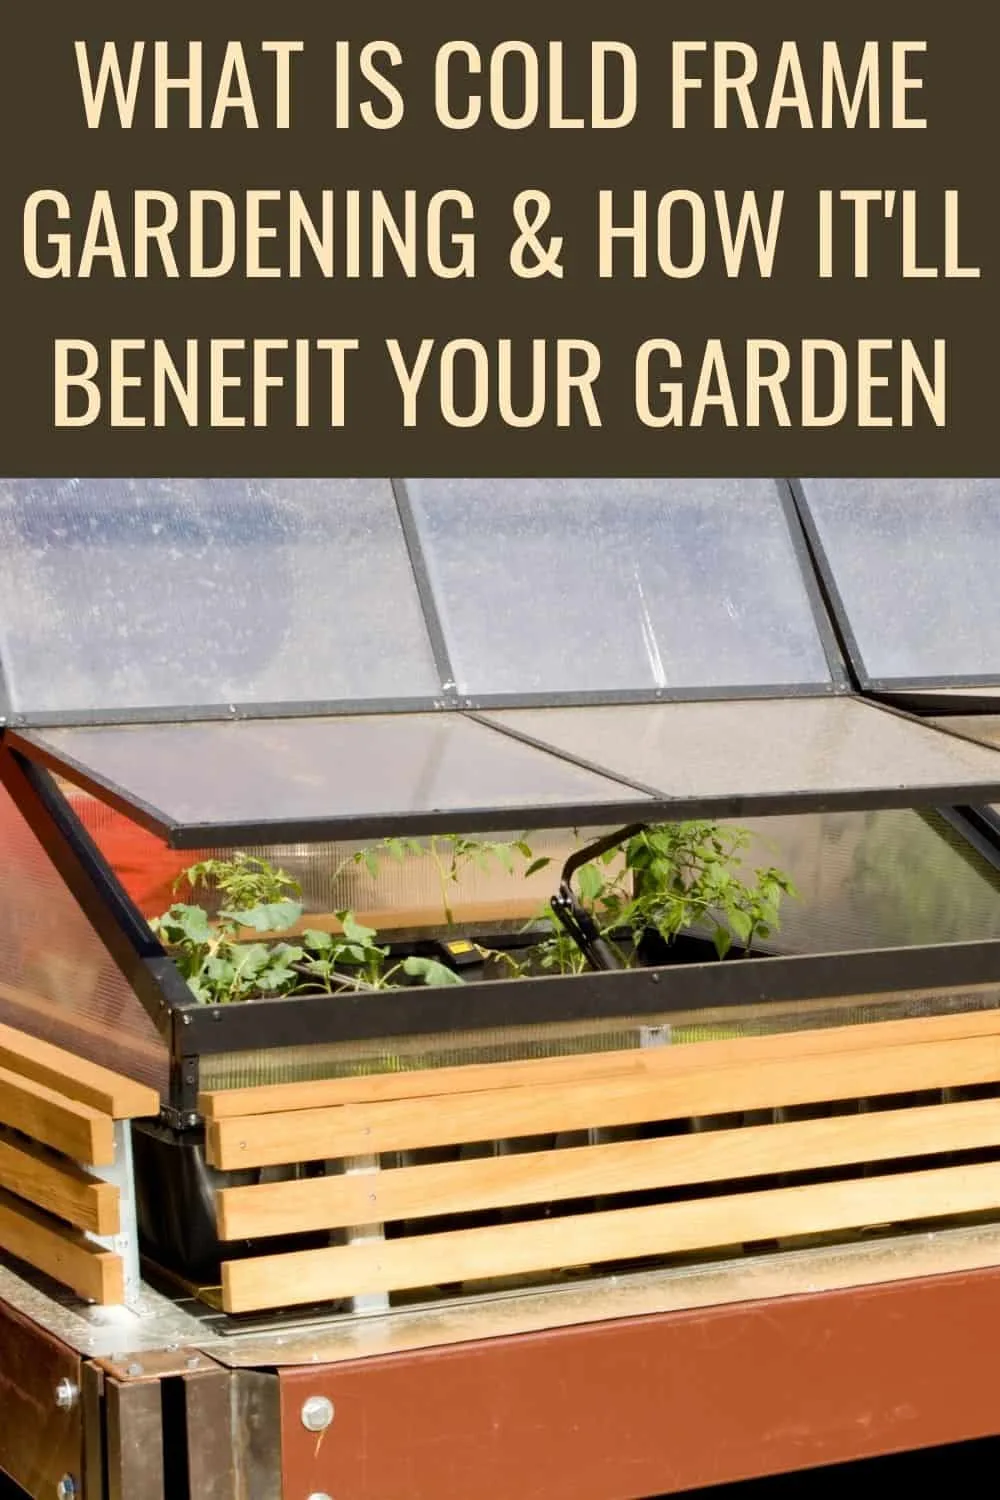 What is cold frame gardenign and how it will benefit your garden